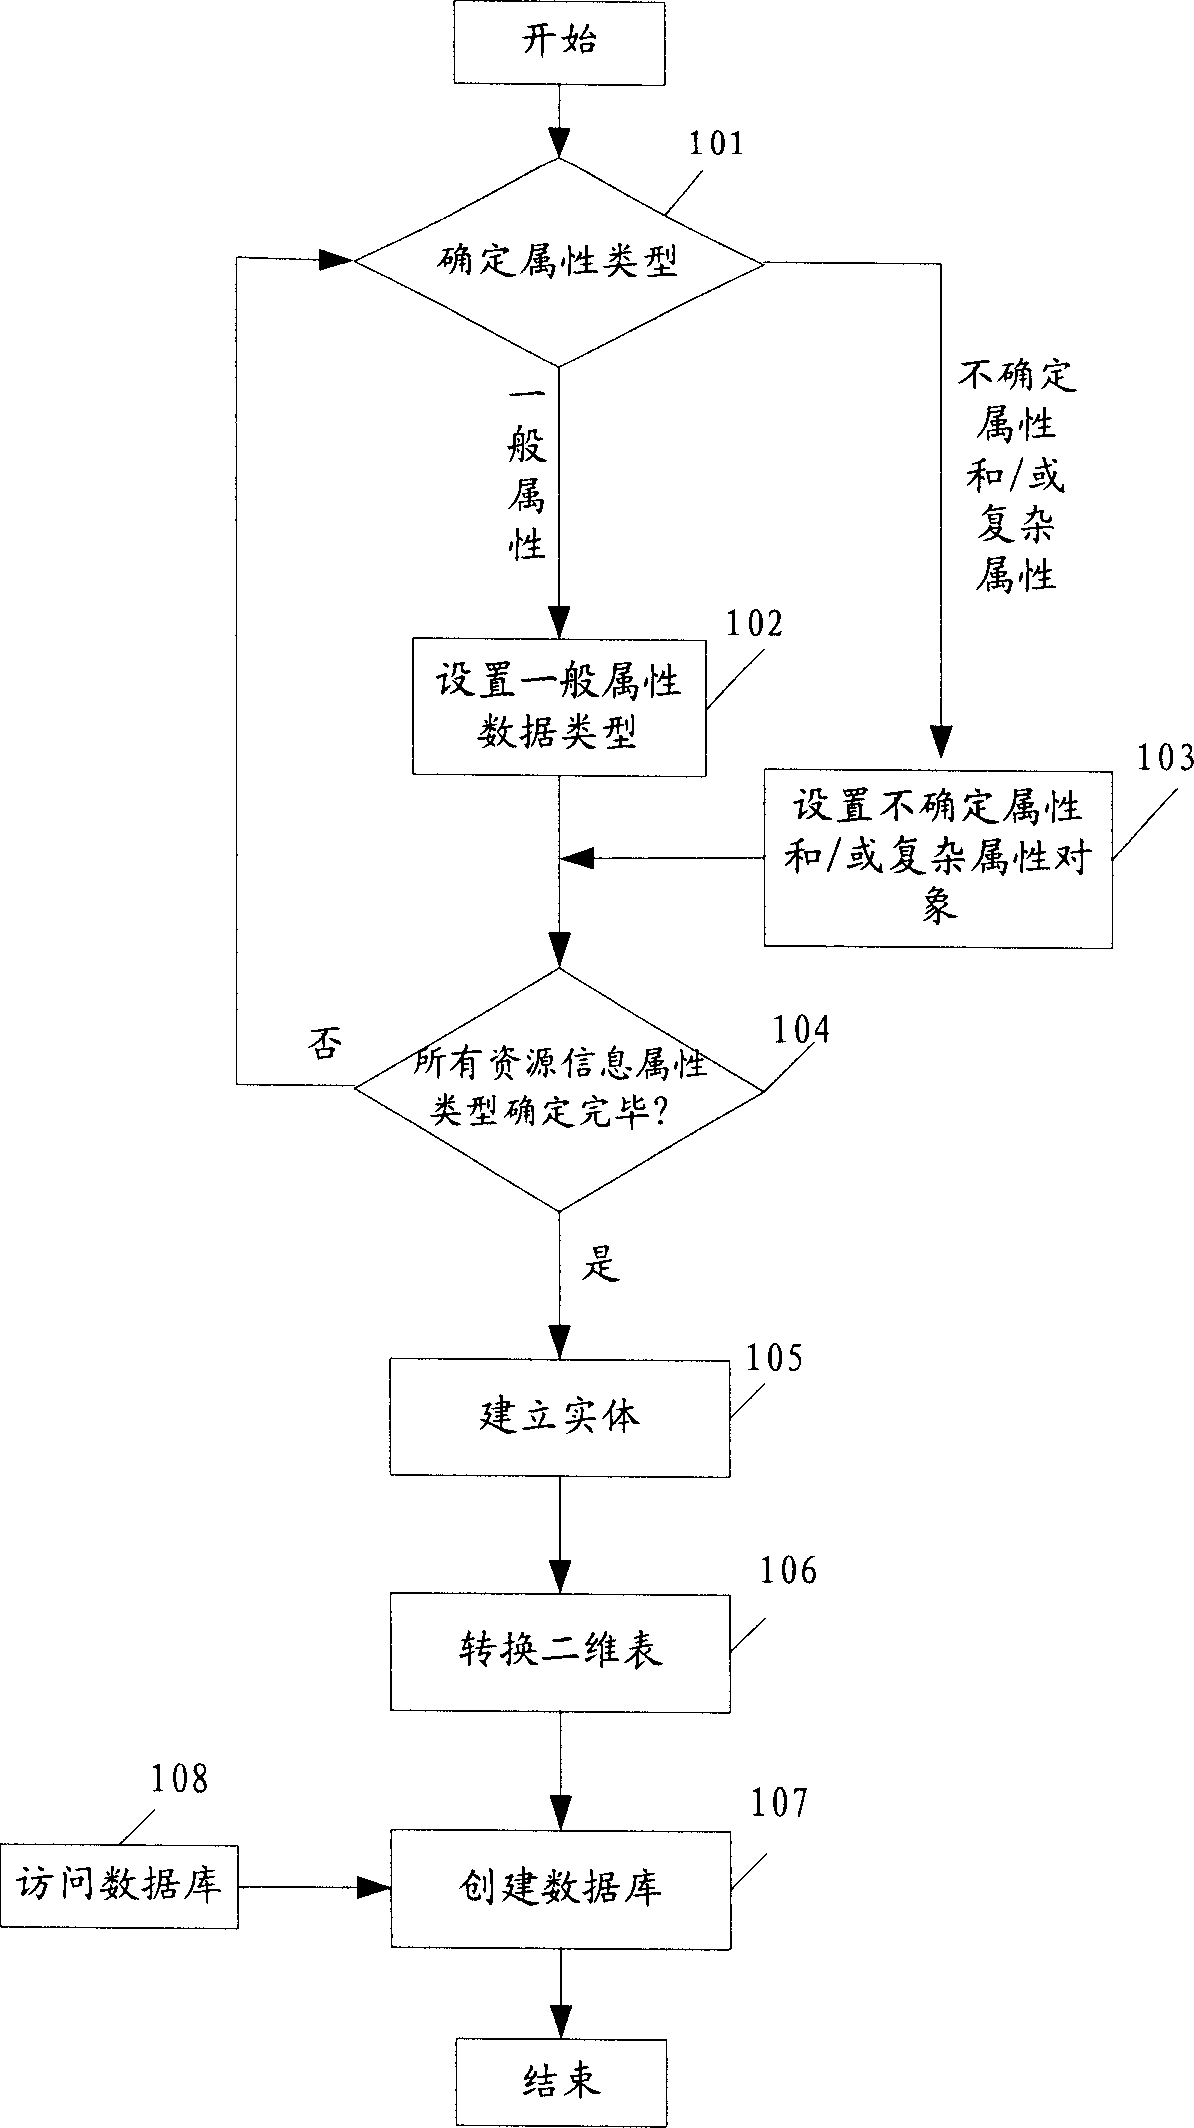 Method for network managing resource message access